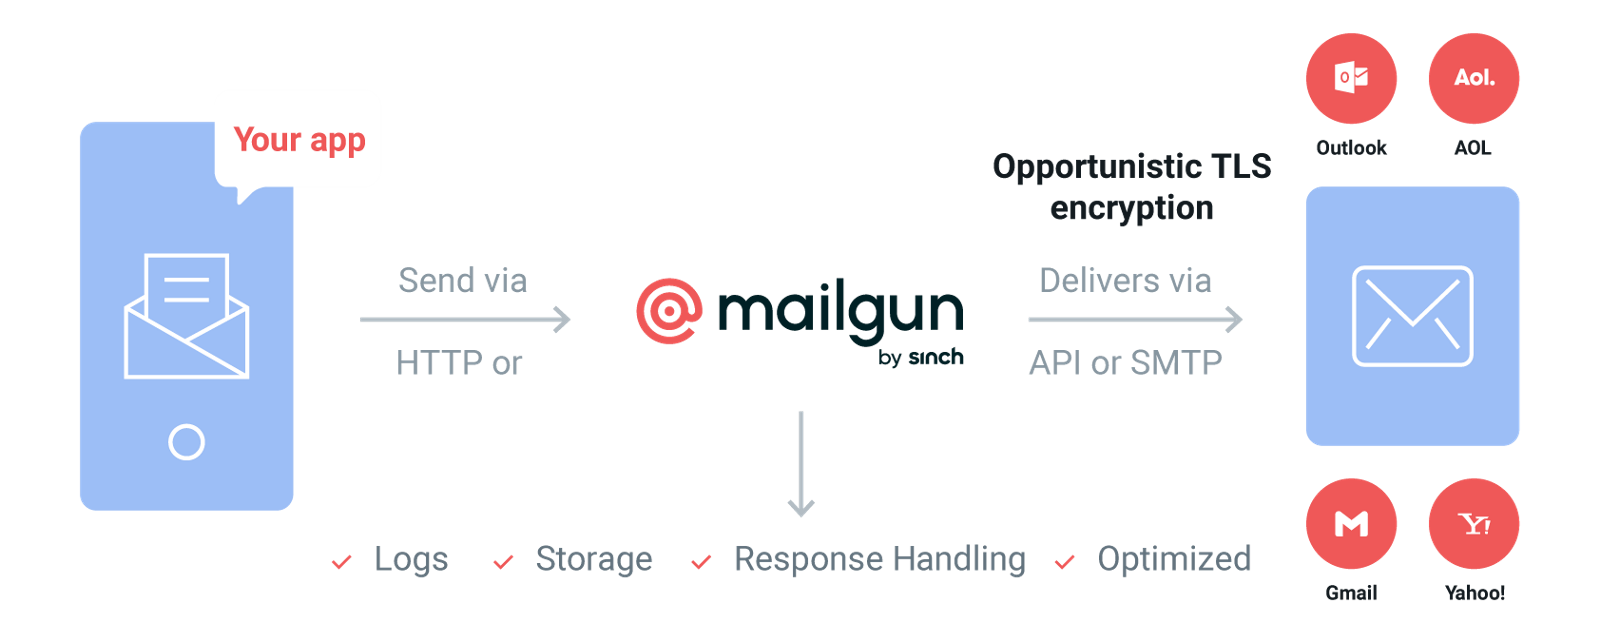 Image shows your email path using a provider like Mailgun, from your app through Mailgun with TLS encryption, to your target inbox.